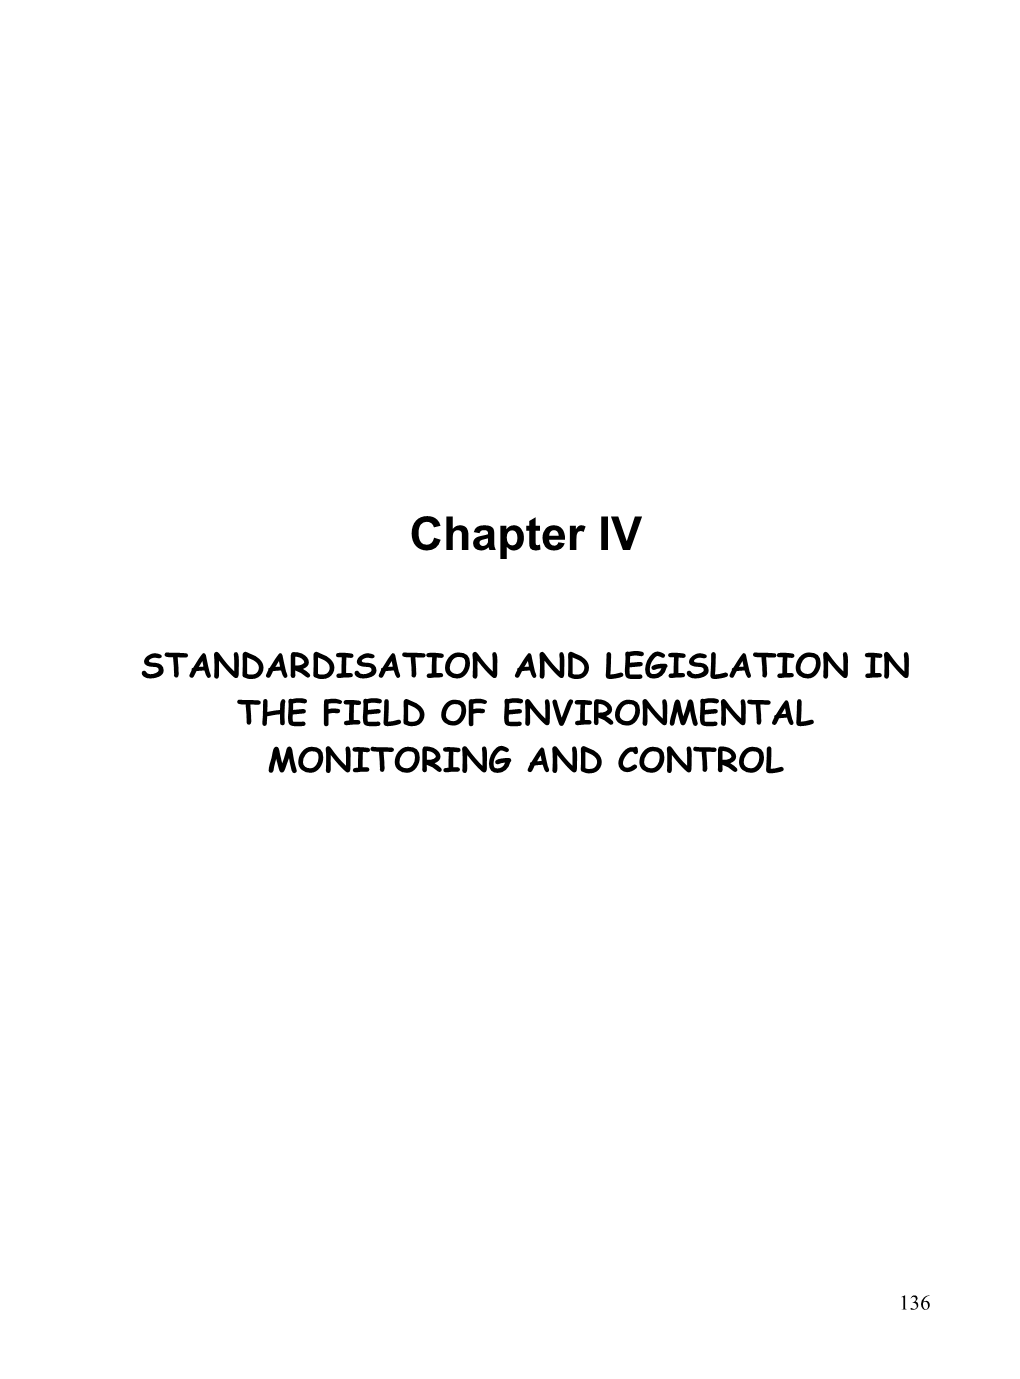 Standardisation and Legislation in the Field of Environmental Monitoring and Control